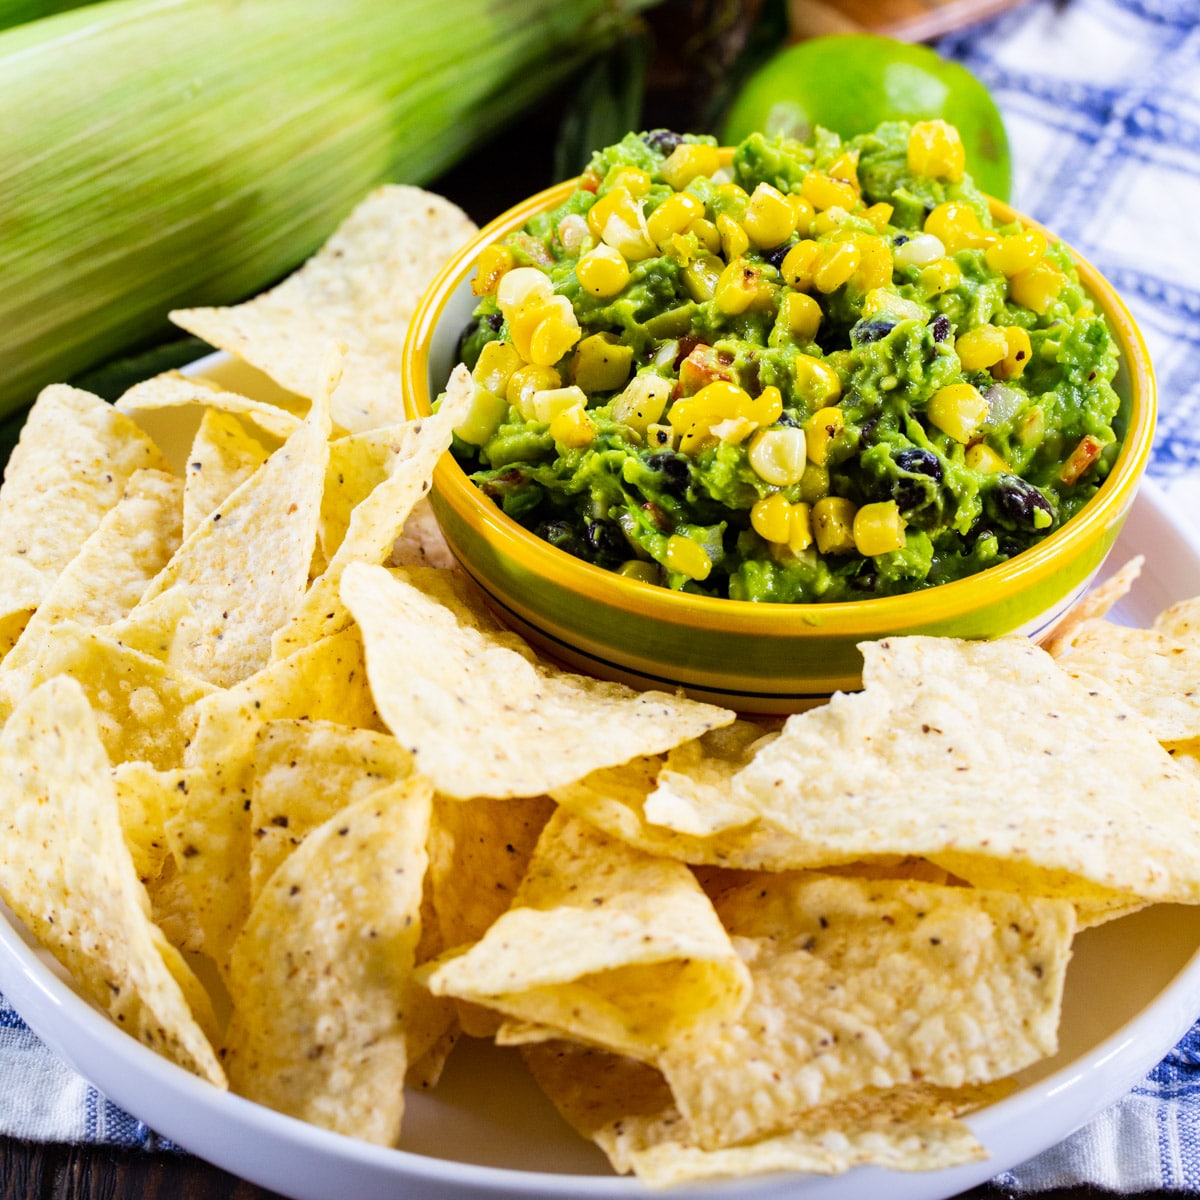 Black Bean and Corn Guacamole in a bowl surrounded by chips.